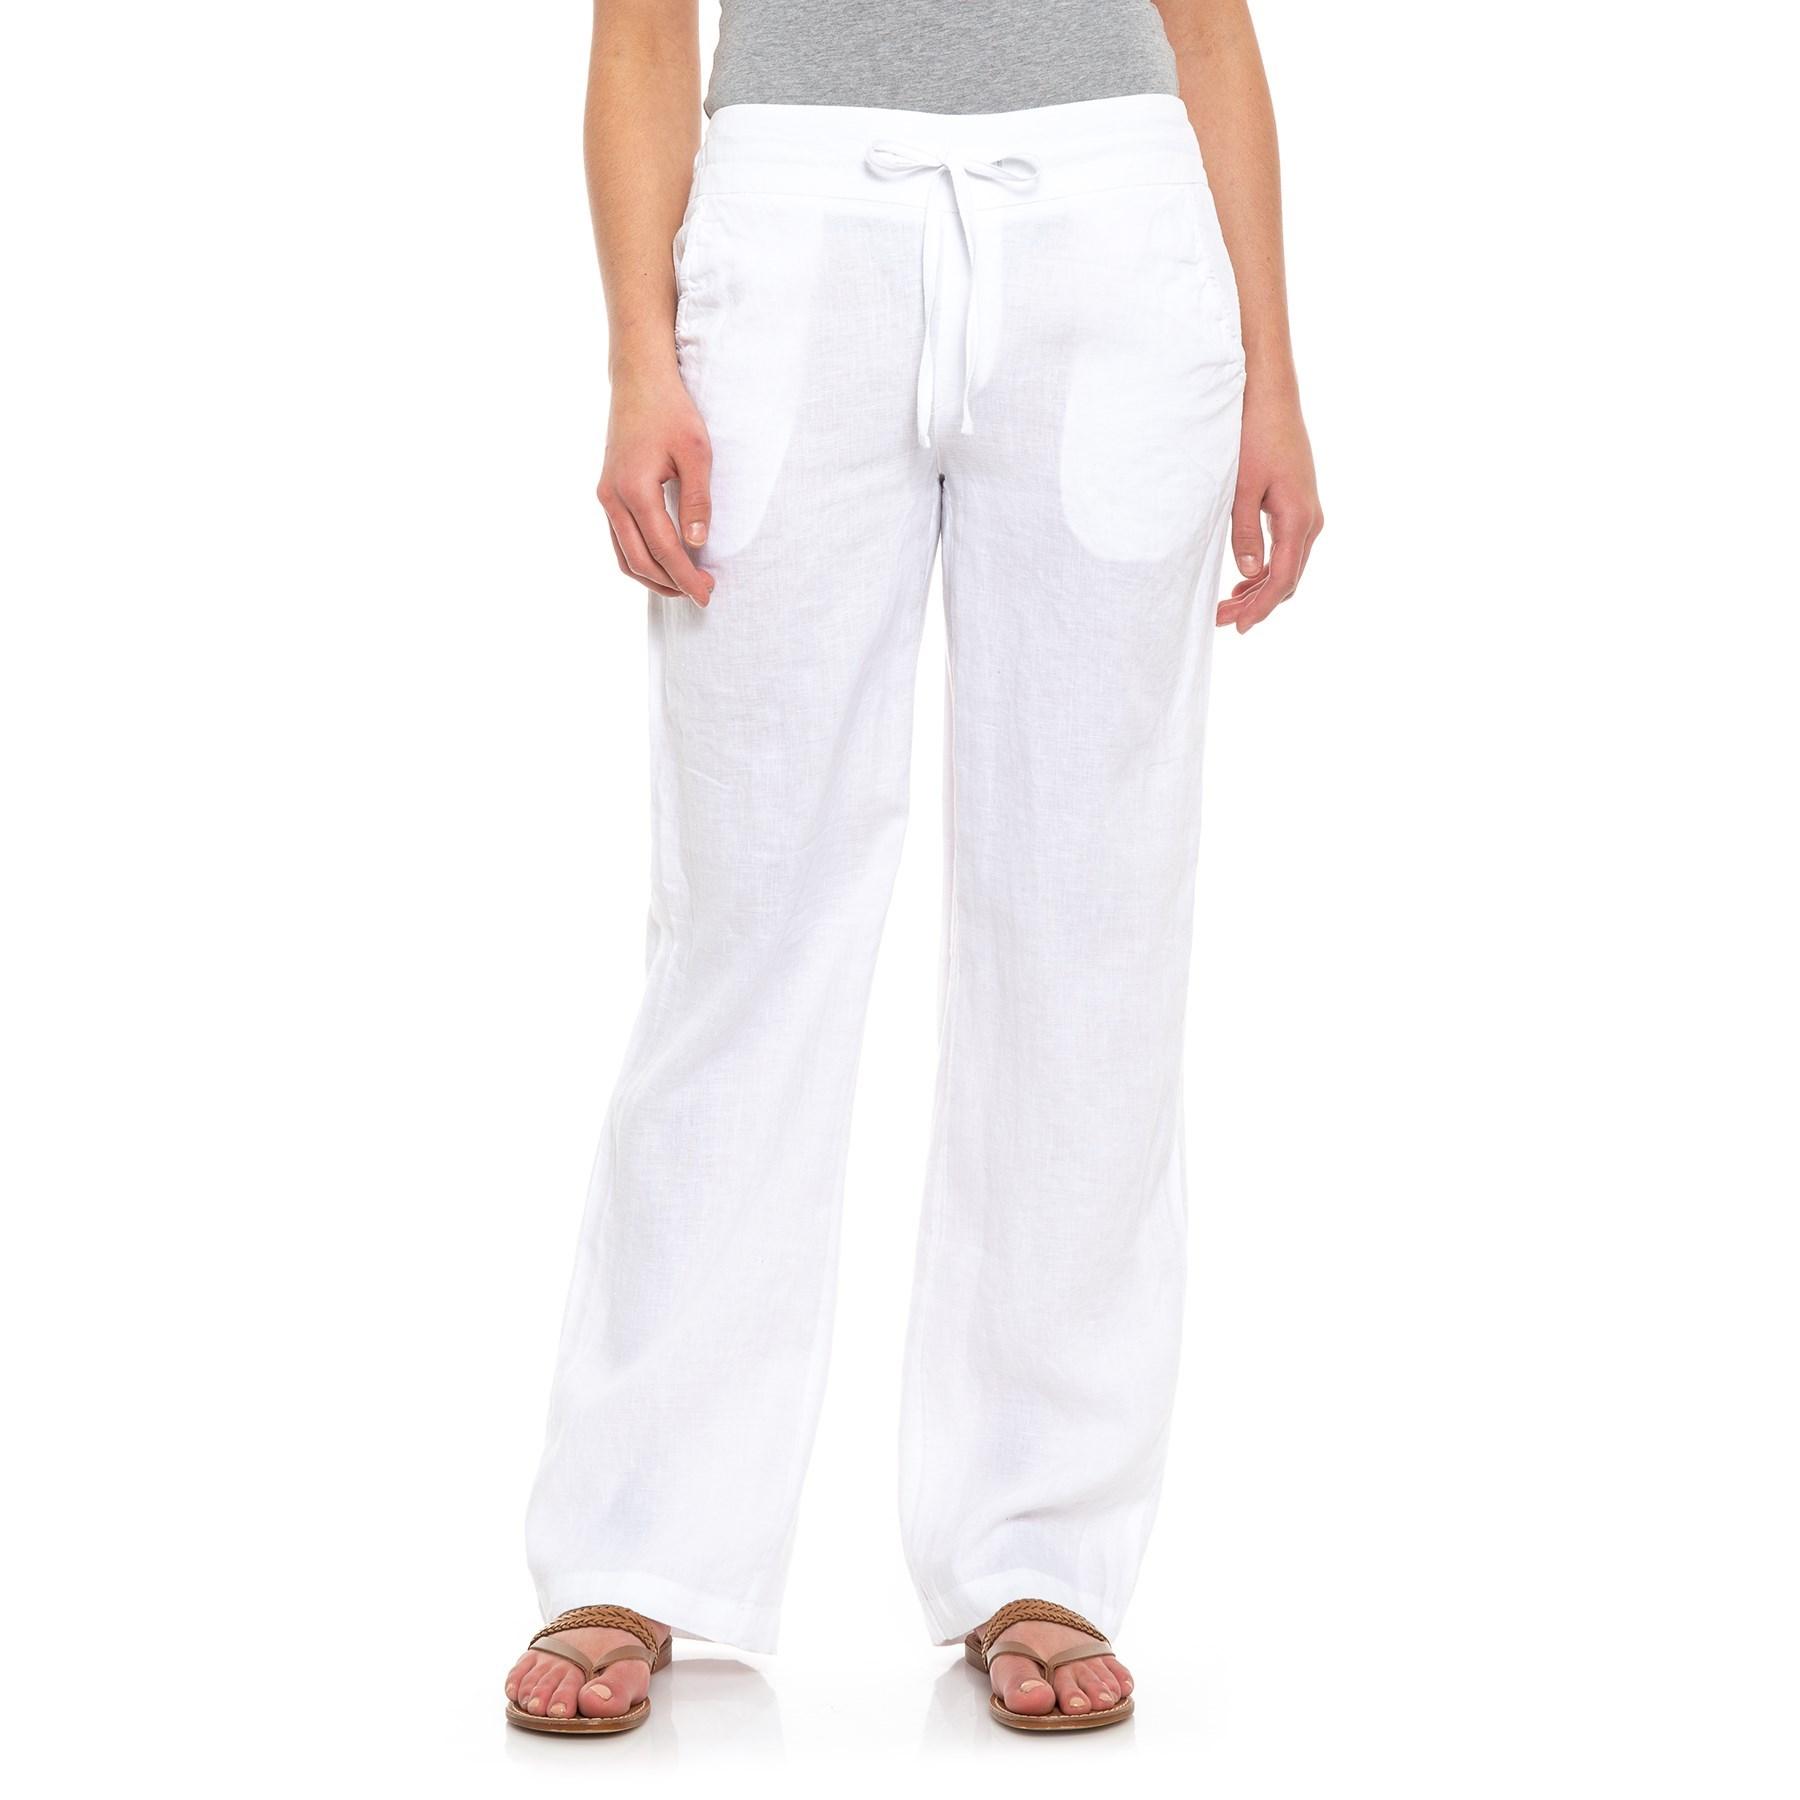 Cynthia Rowley White Solid Pull-on Pants (for Women) in White - Lyst